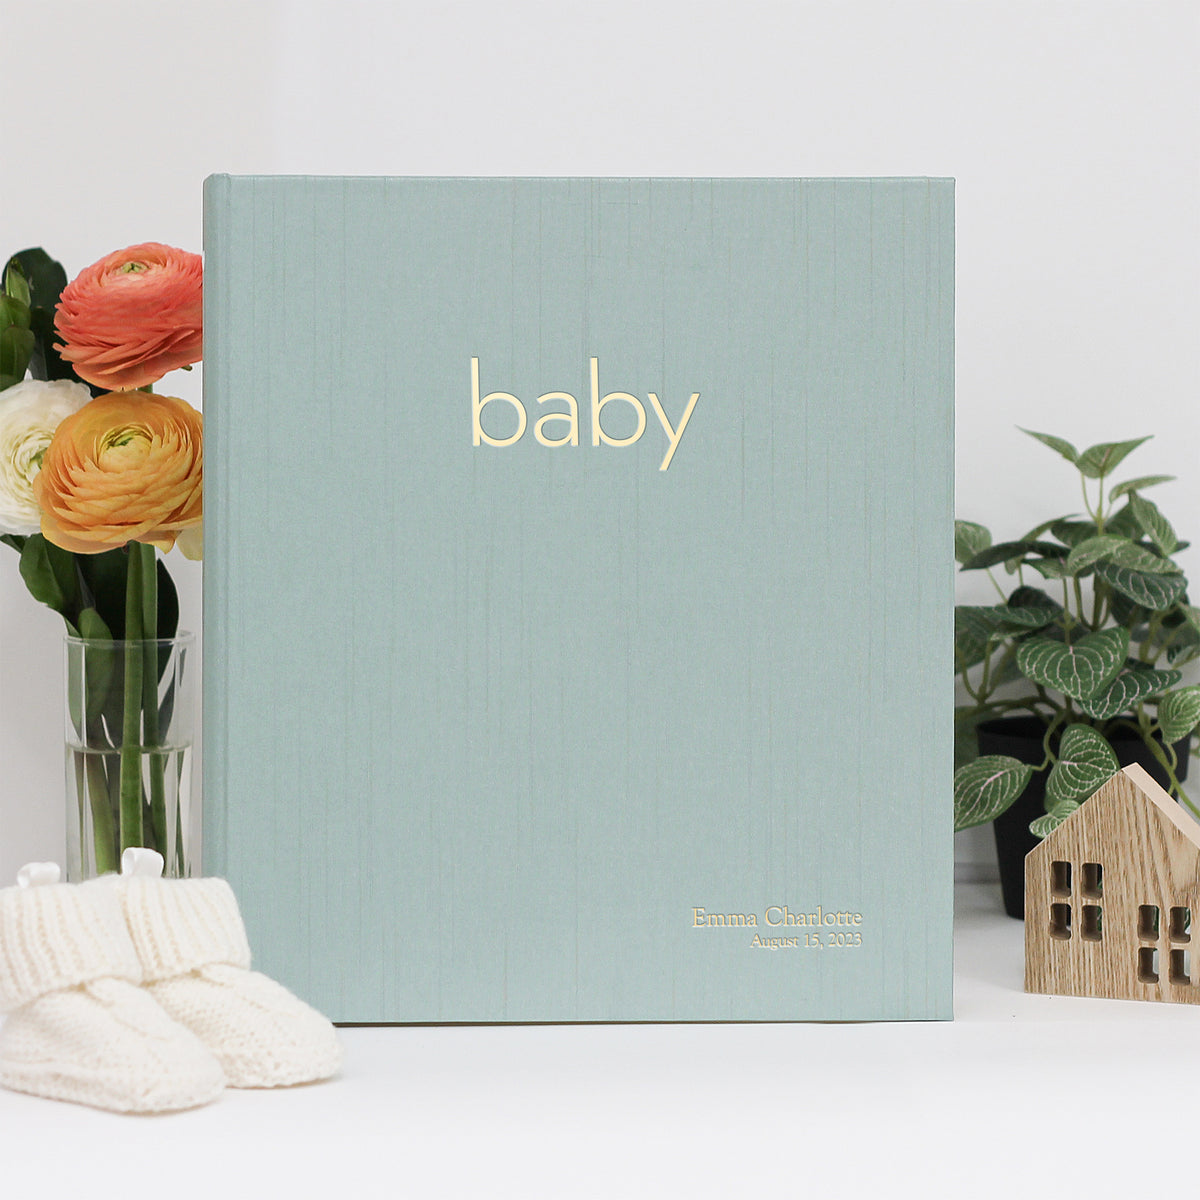 Personalized Baby Memory Binder with Misty Blue Silk Cover | Select Your Own Pages